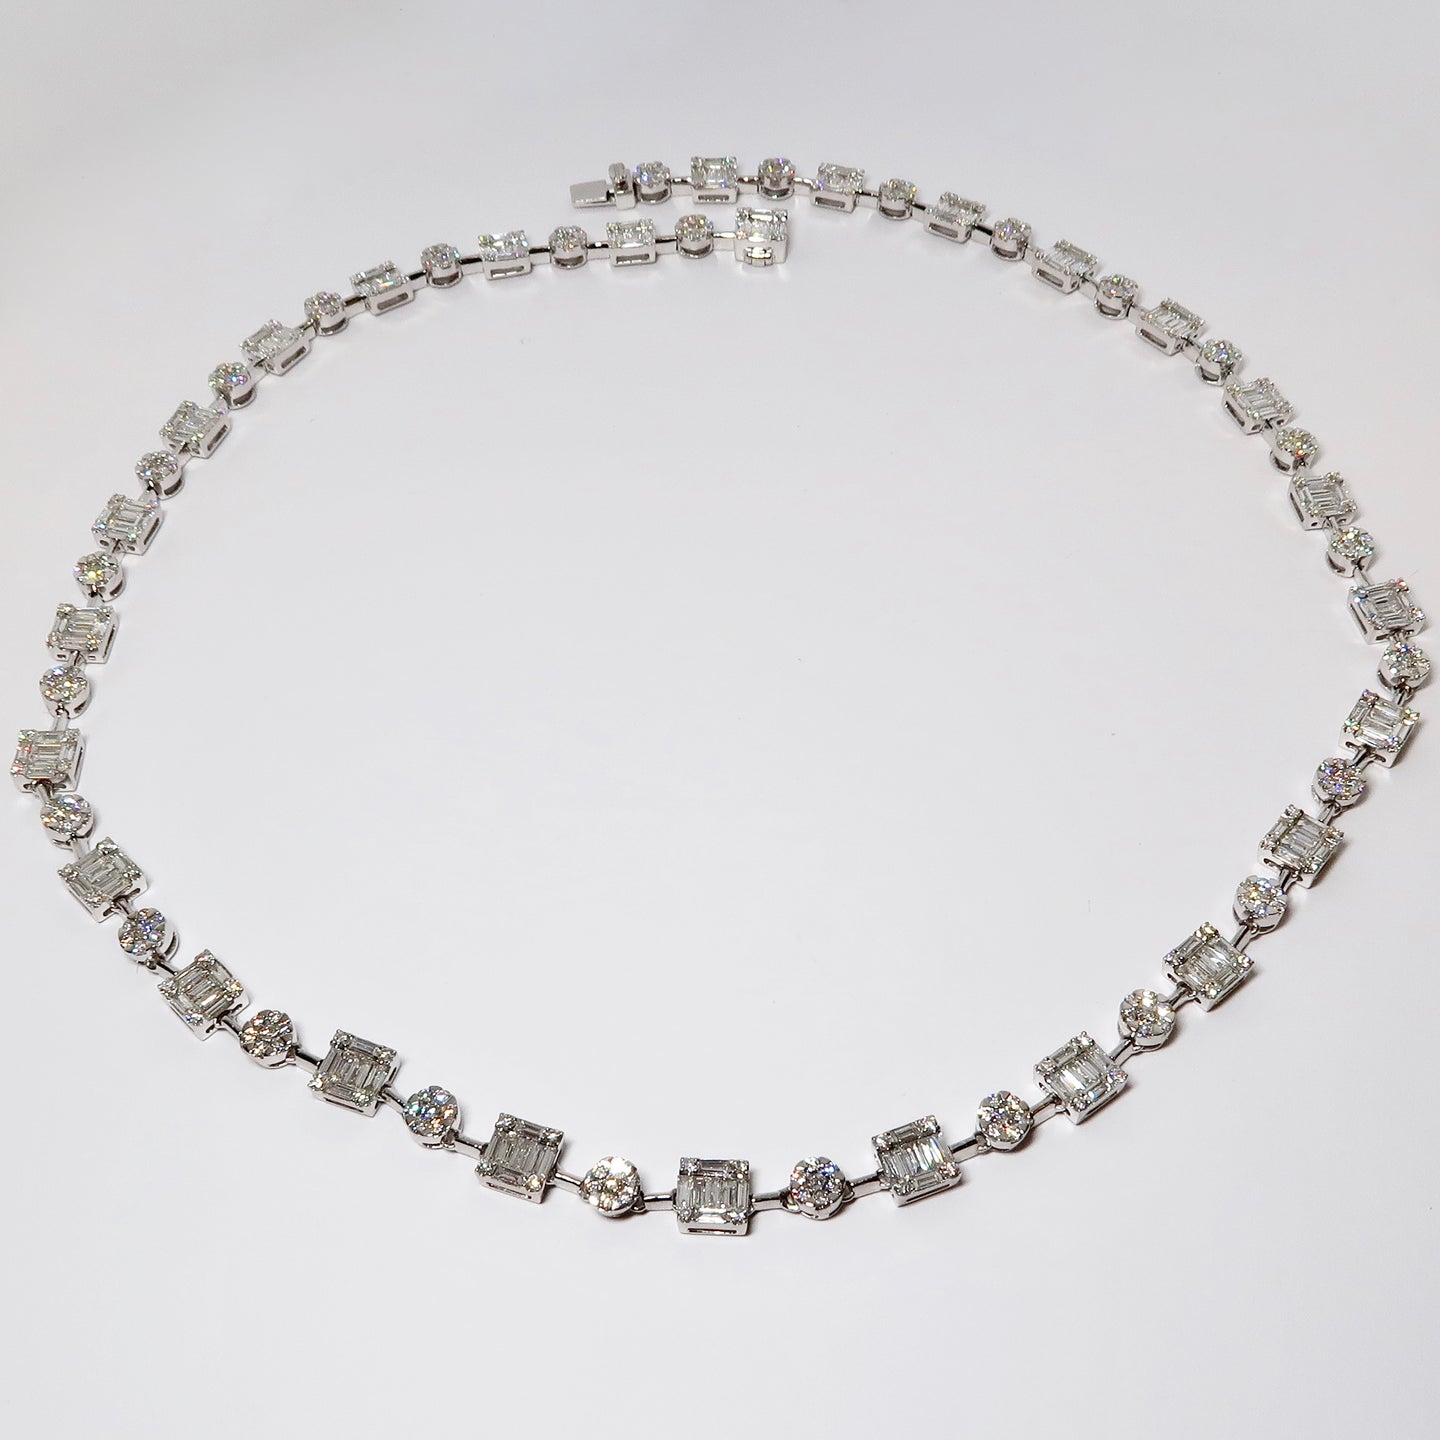 Fancy Diamond Necklace, Round White and Baguette White Diamonds